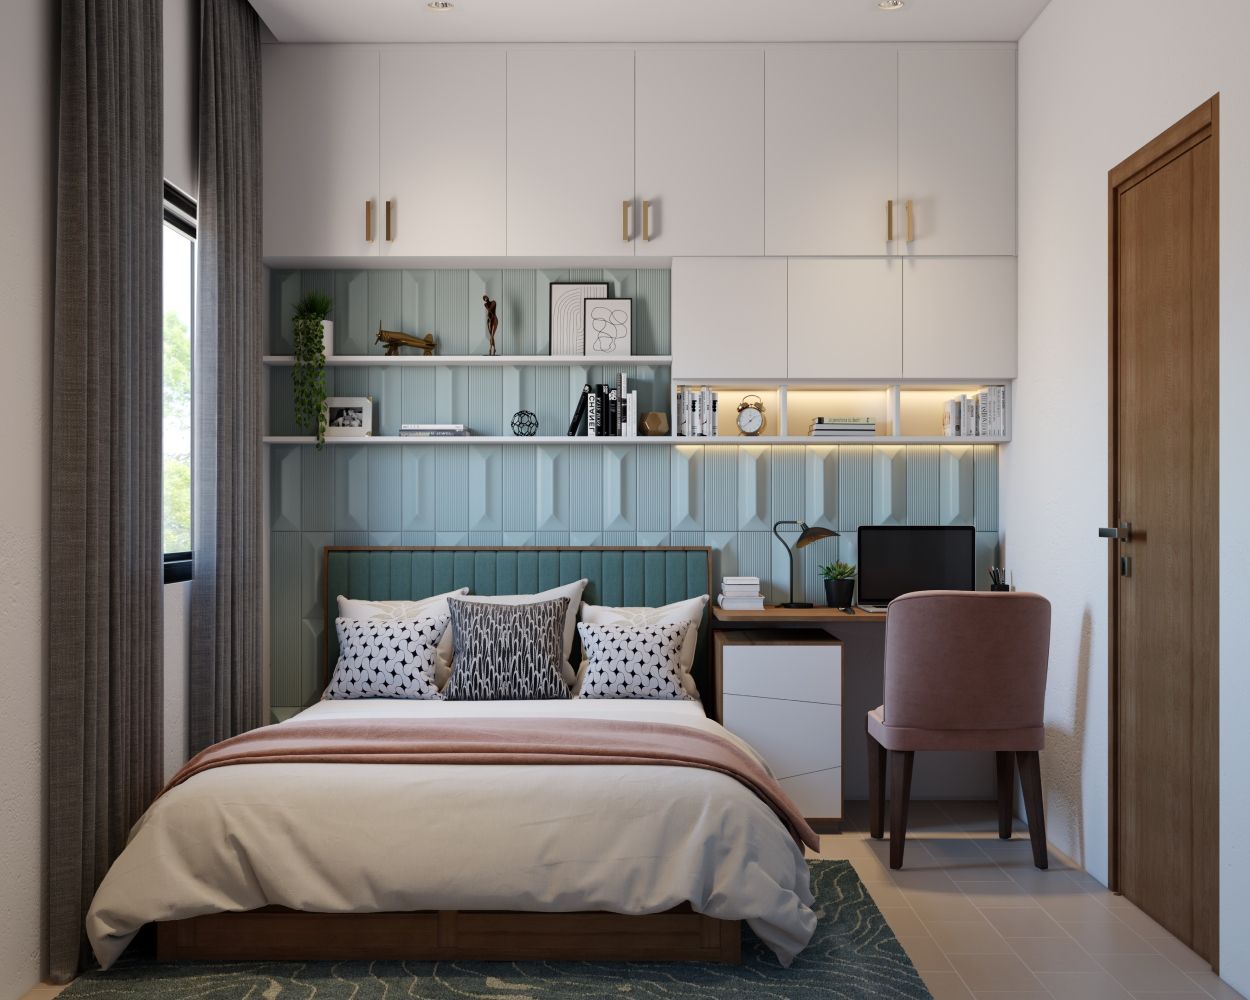 Contemporary Master Bedroom Design With Teal Tufted Headboard And Overhead Storage